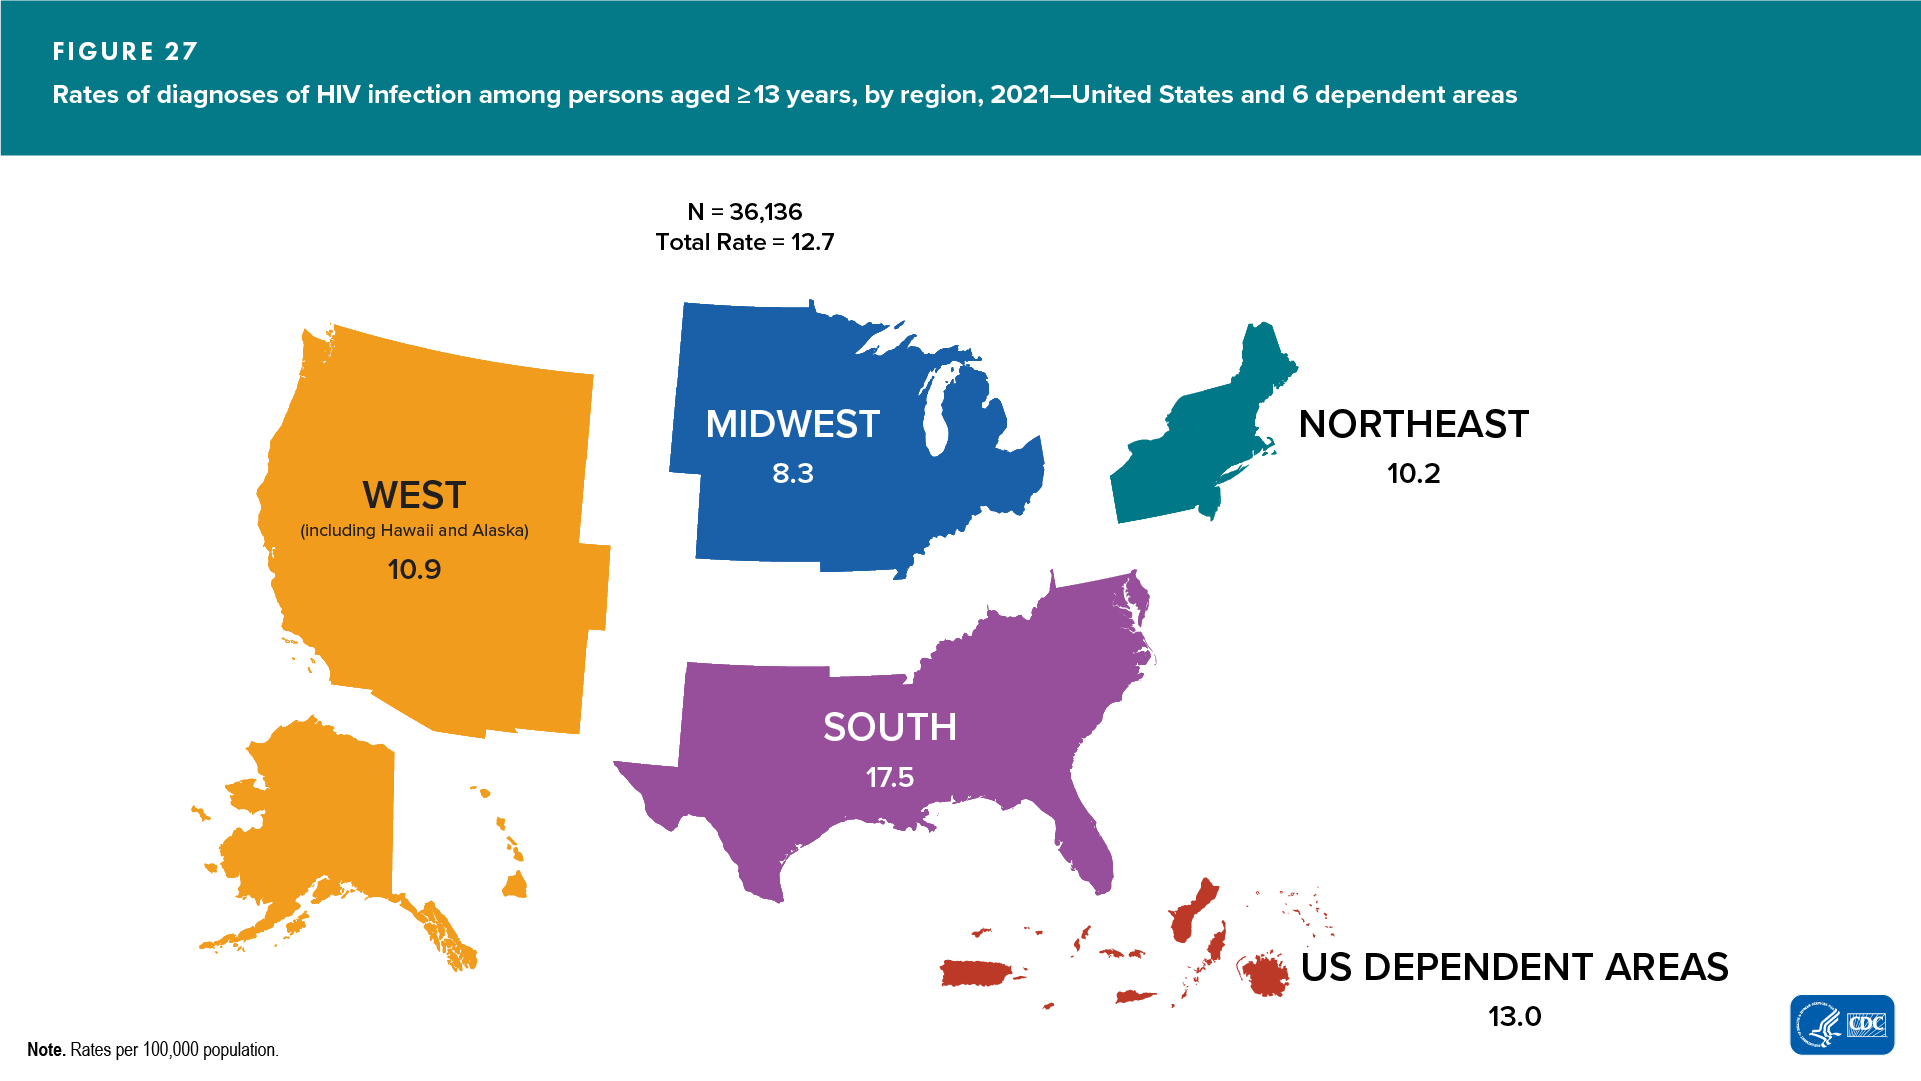 In 2021, the rates of diagnosis of HIV infection among persons aged ≥13 years were highest in the South (17.5 per 100,000 population), followed by the U.S. dependent areas (13.0) and the West (10.9).